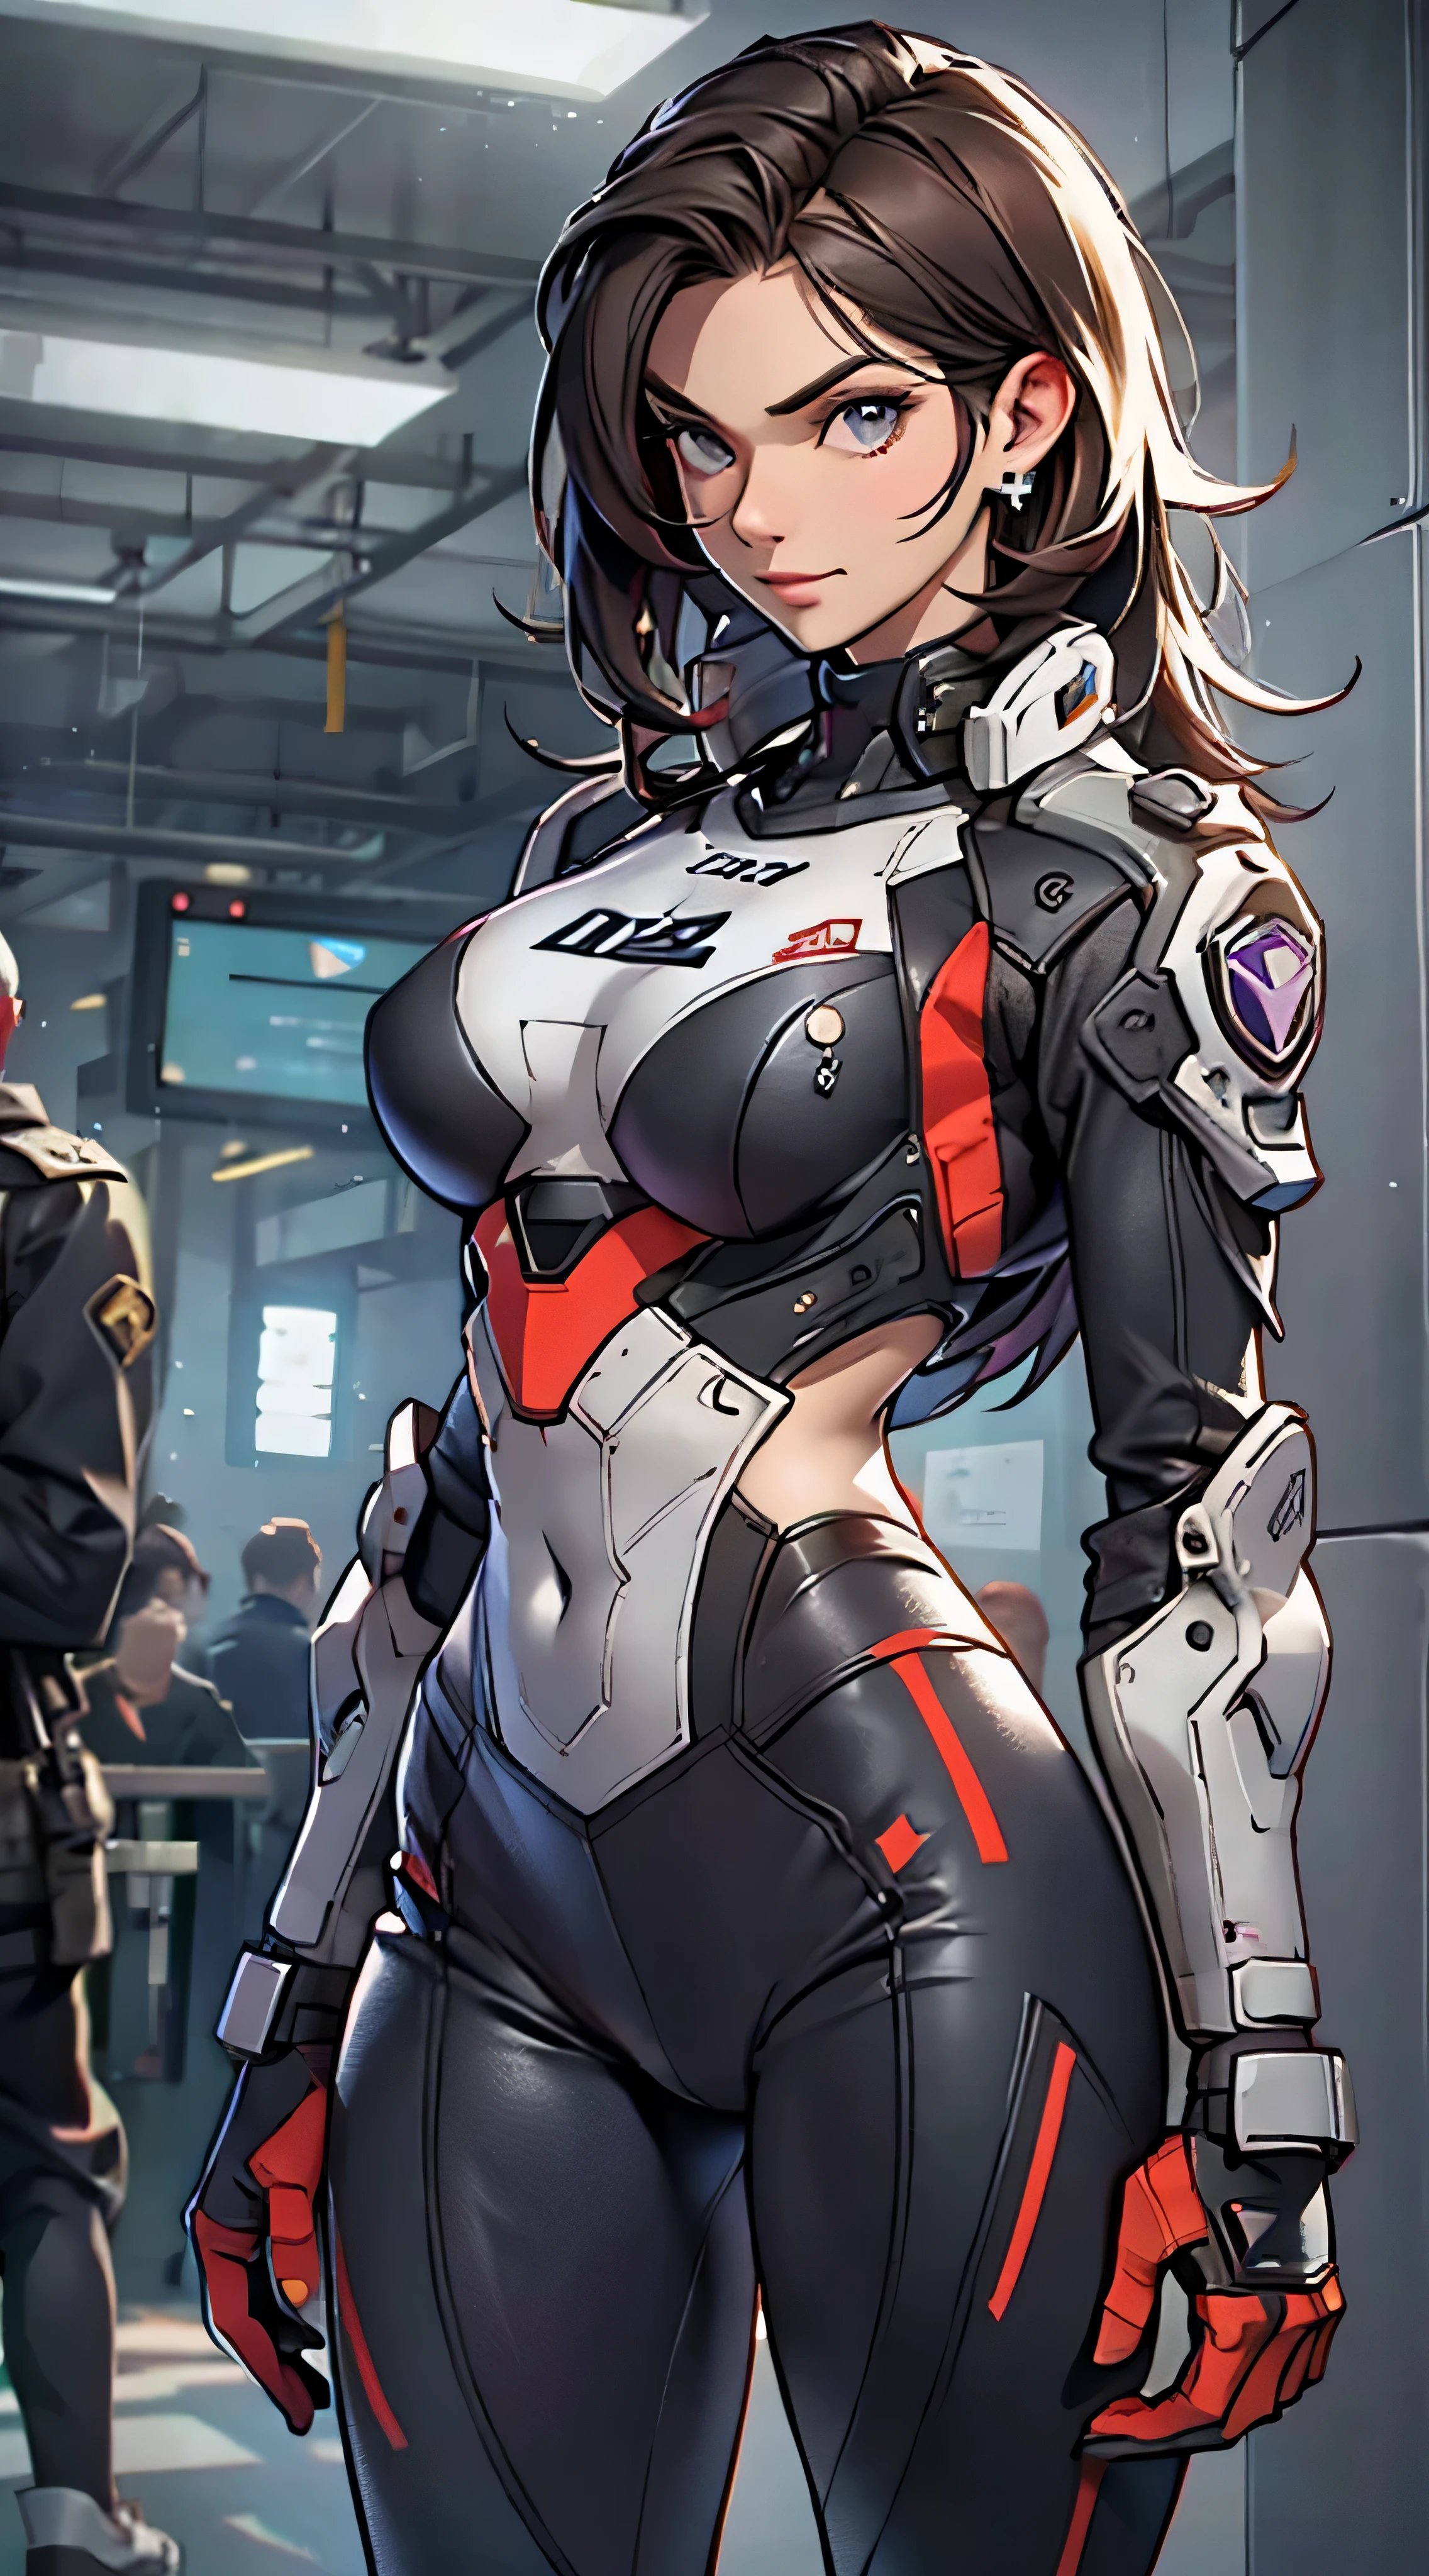 11:23(((Best quality: 1.4))),(Unbeatable masterpiece), (hyper HD),(Hyper-realistic 8k CG)、（dark colored hair） ((( body))), (((1 girl in))), 25-year-old American soldier with perfect body,,Beautiful and well groomed face,muscular body:1.2,Solid royal blue jacket with details, (Pictures from head to thighs)， Complex equipment, purpleish color，long trousers，The clothes inside are dark，Clothes with metal electronic parts,Tech Armor )